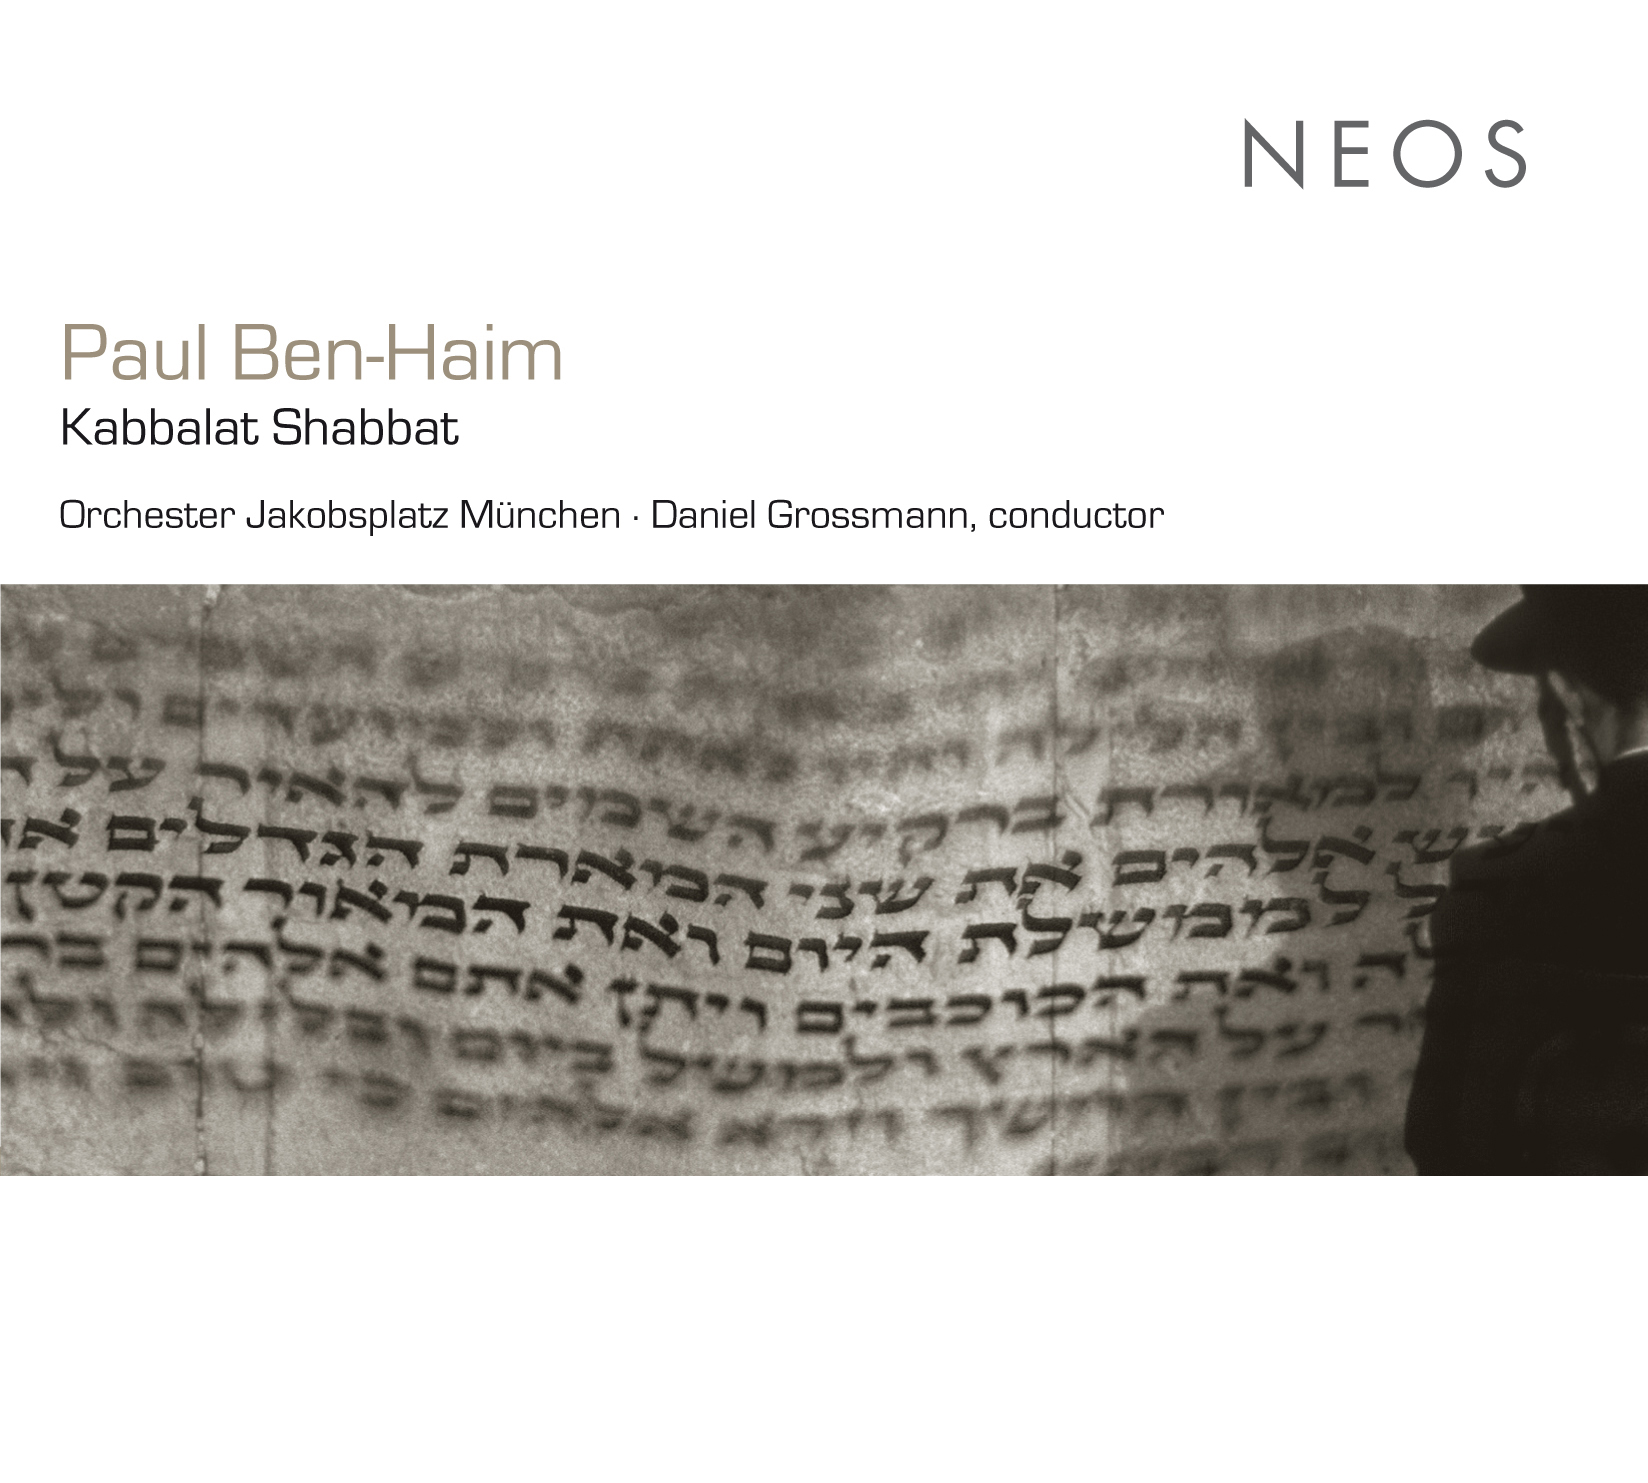 Paul Ben-Haim’s Rendition of the Blessing Over the Shabbat Candles (Reform)